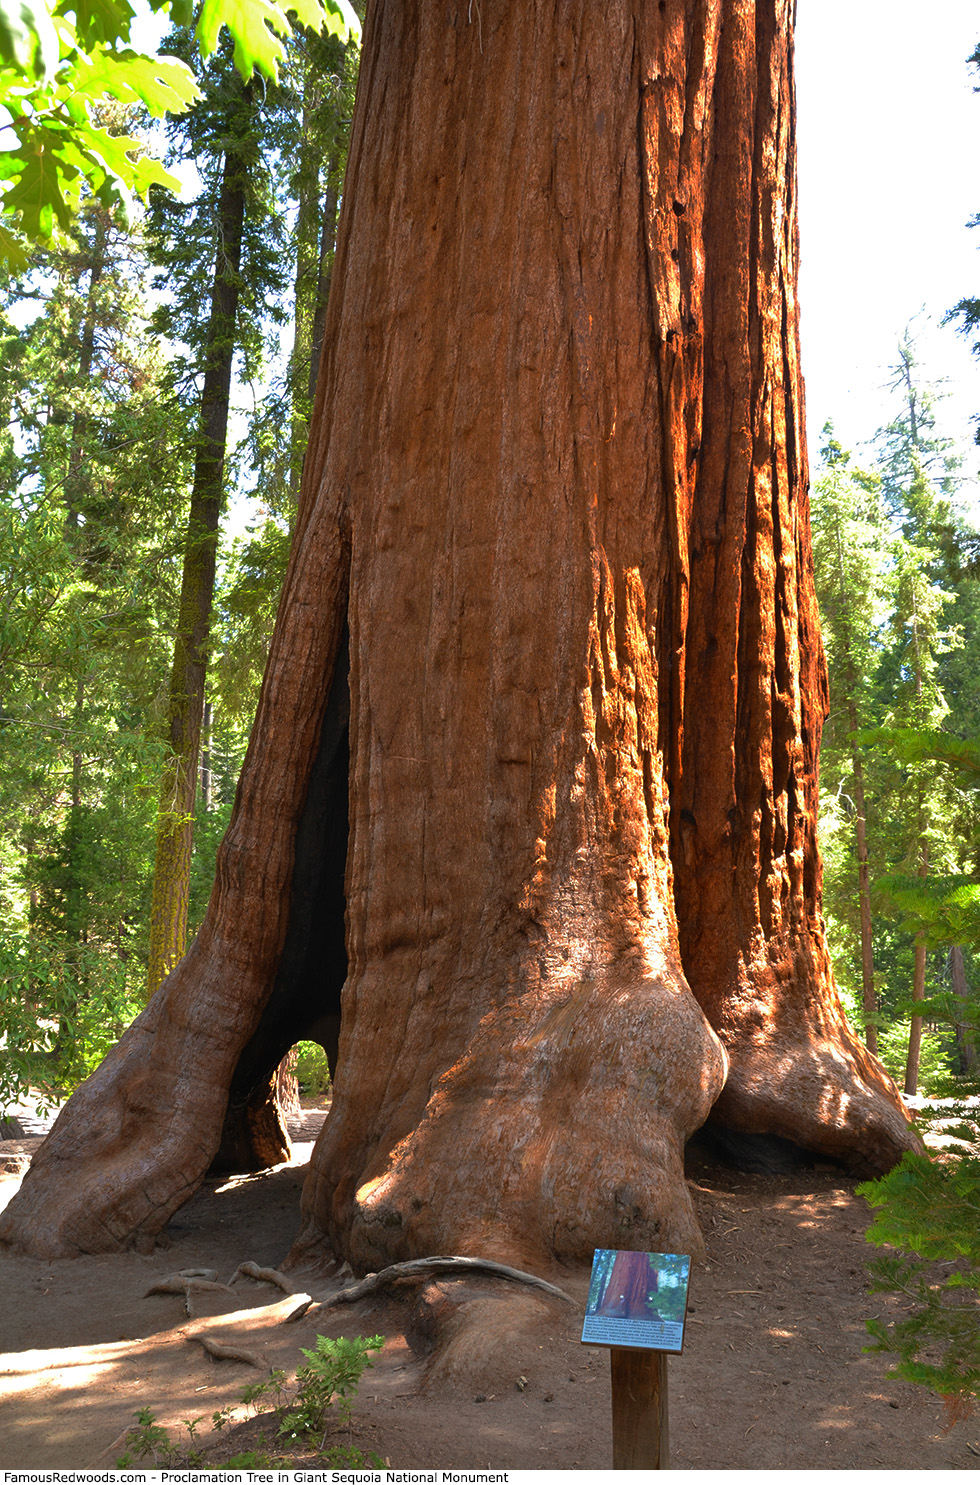 Giant Sequoia National Monument - Proclamation Tree